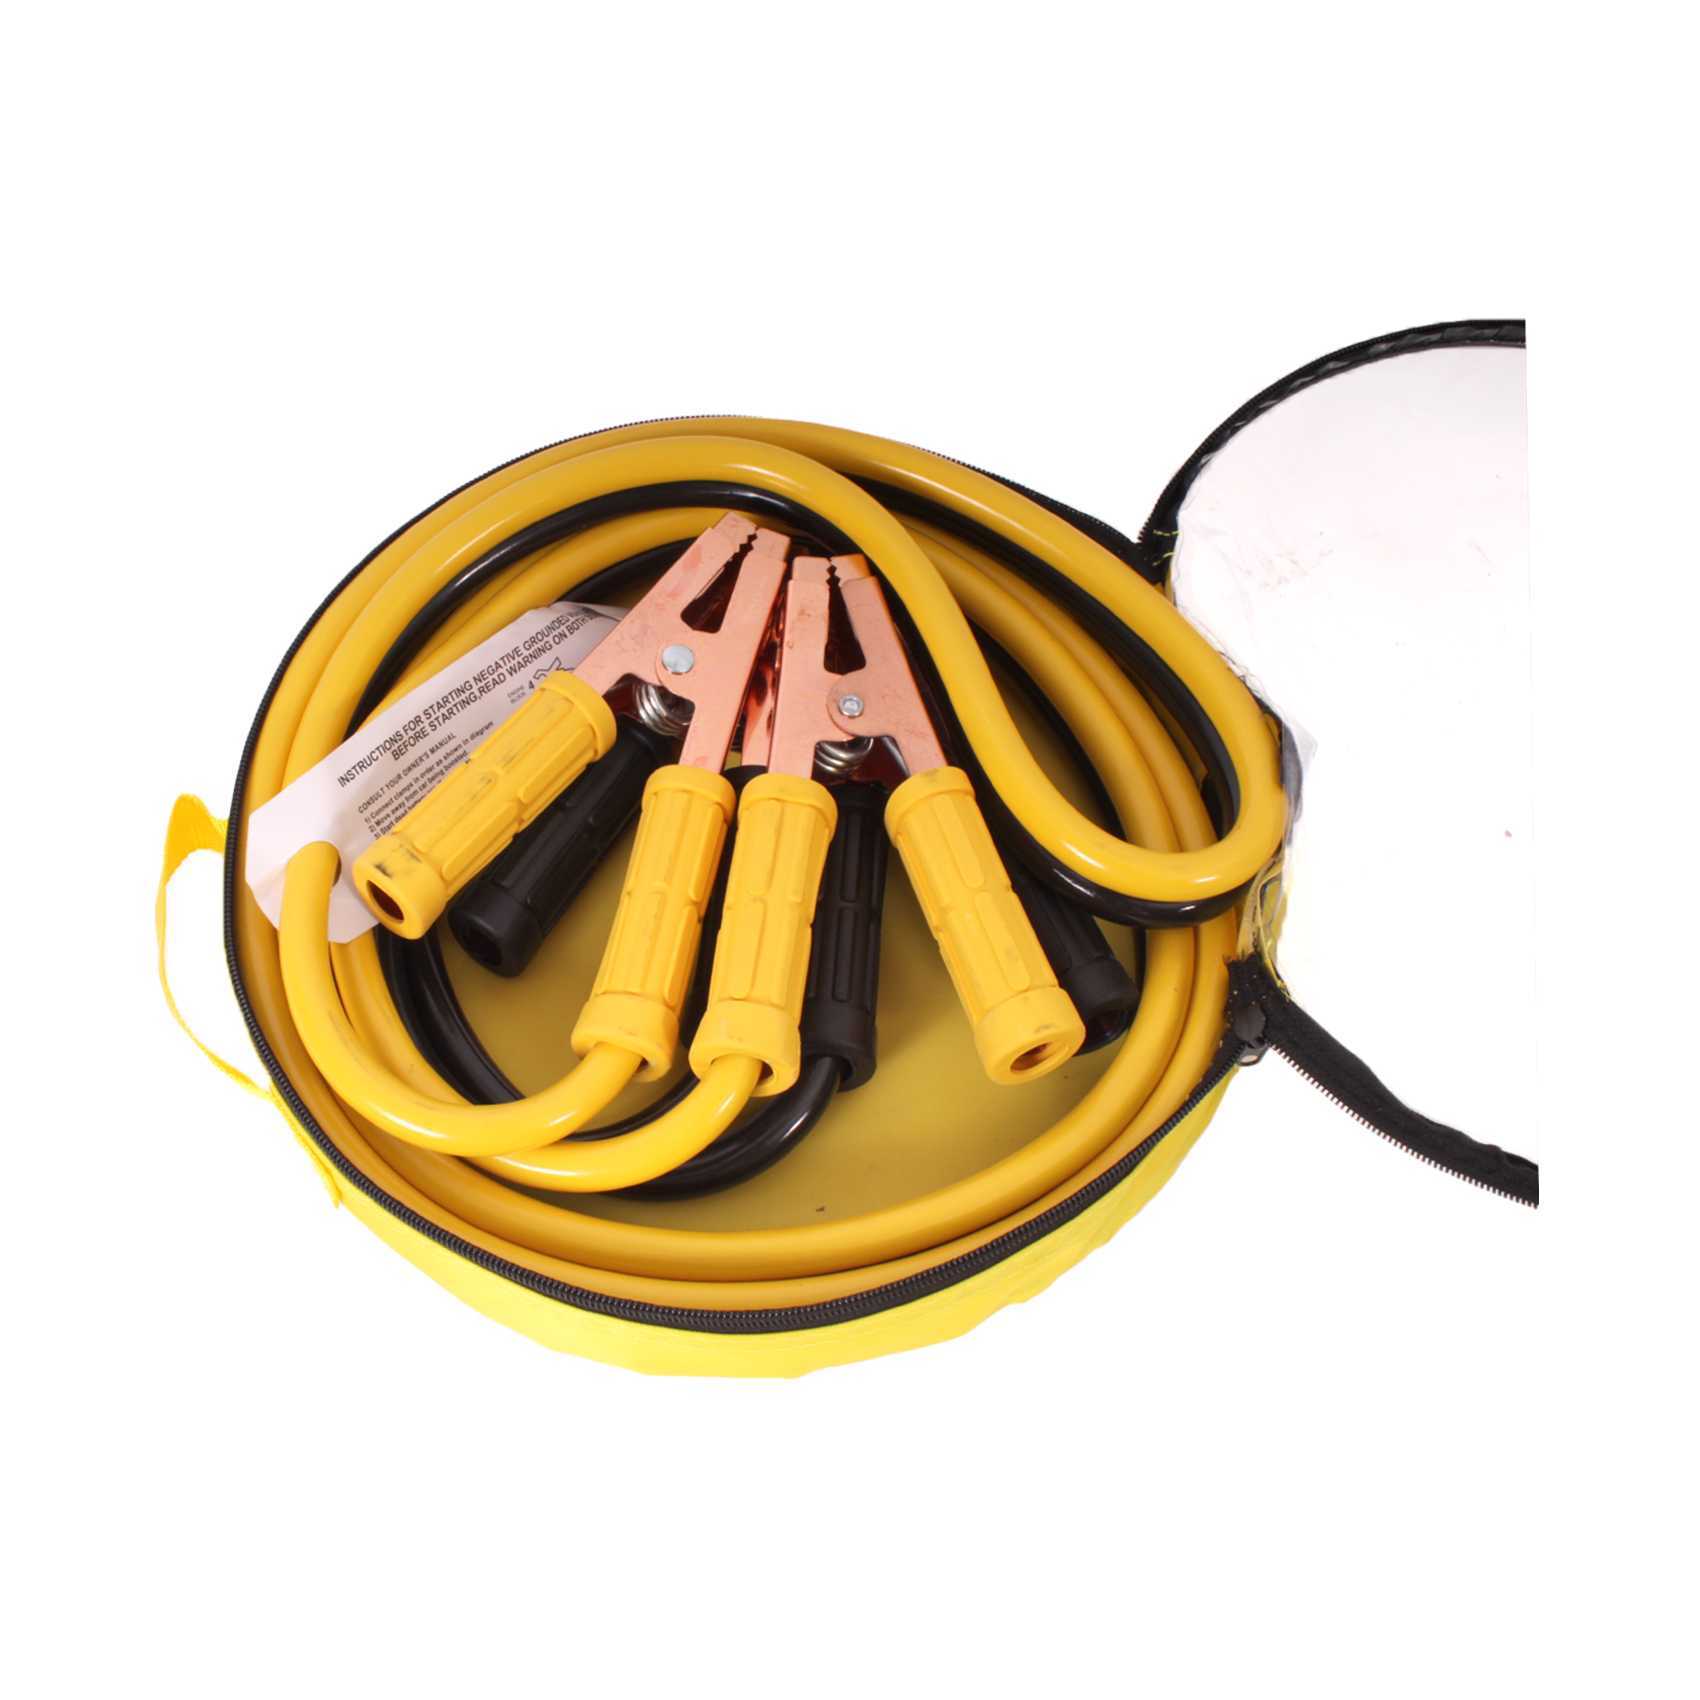 Buy Booster Cable Online - Shop on Carrefour Kenya